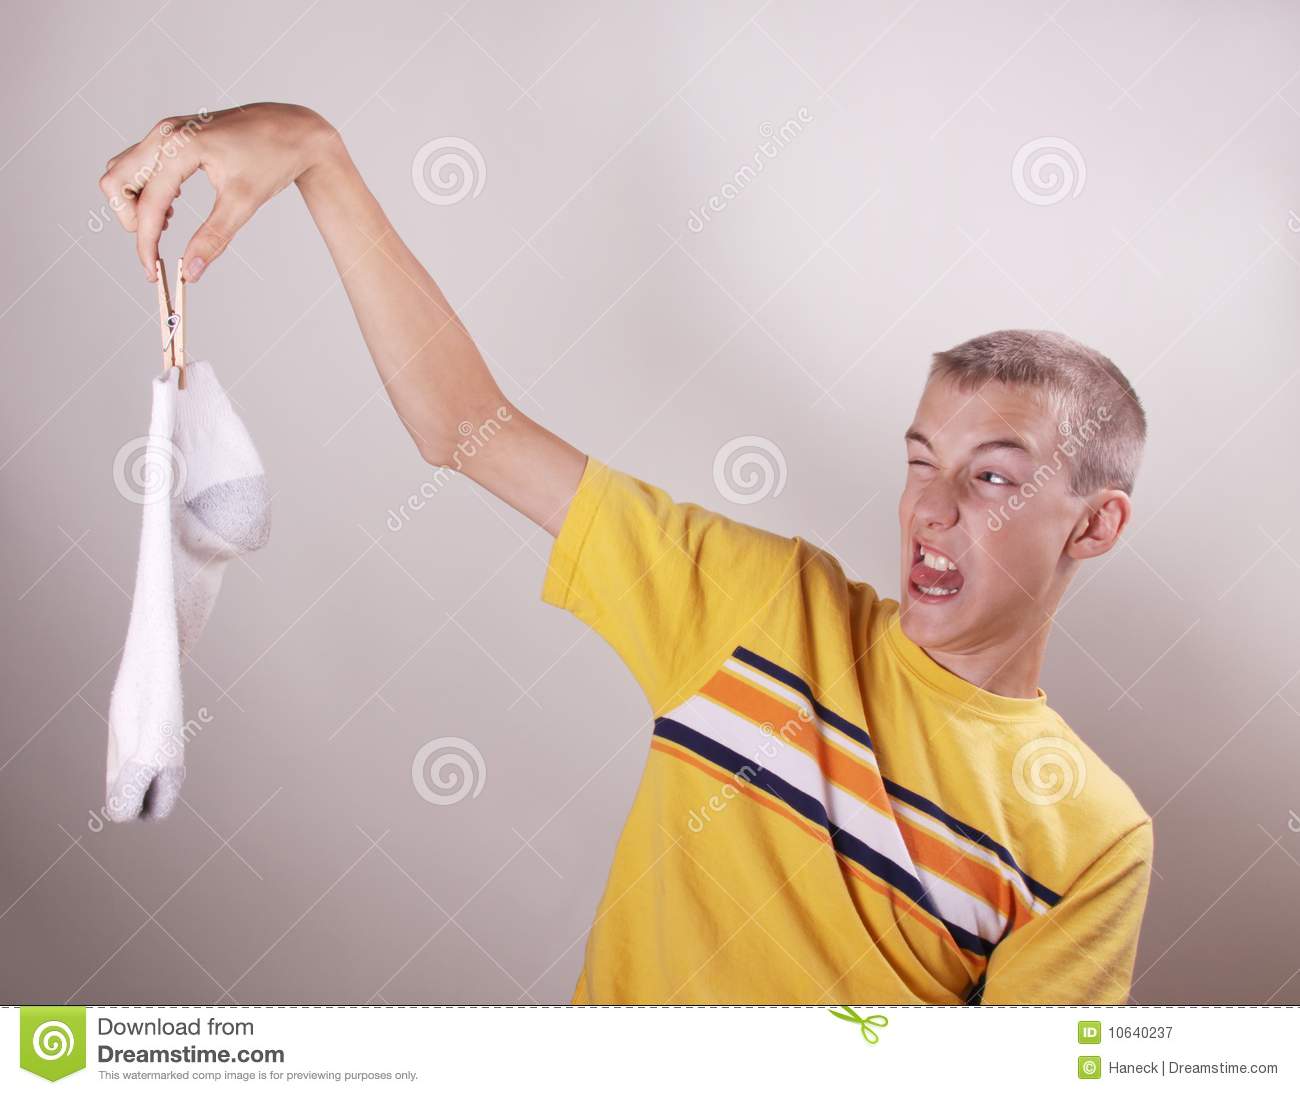 Gross Smelly Sock Royalty Free Stock Photography   Image  10640237